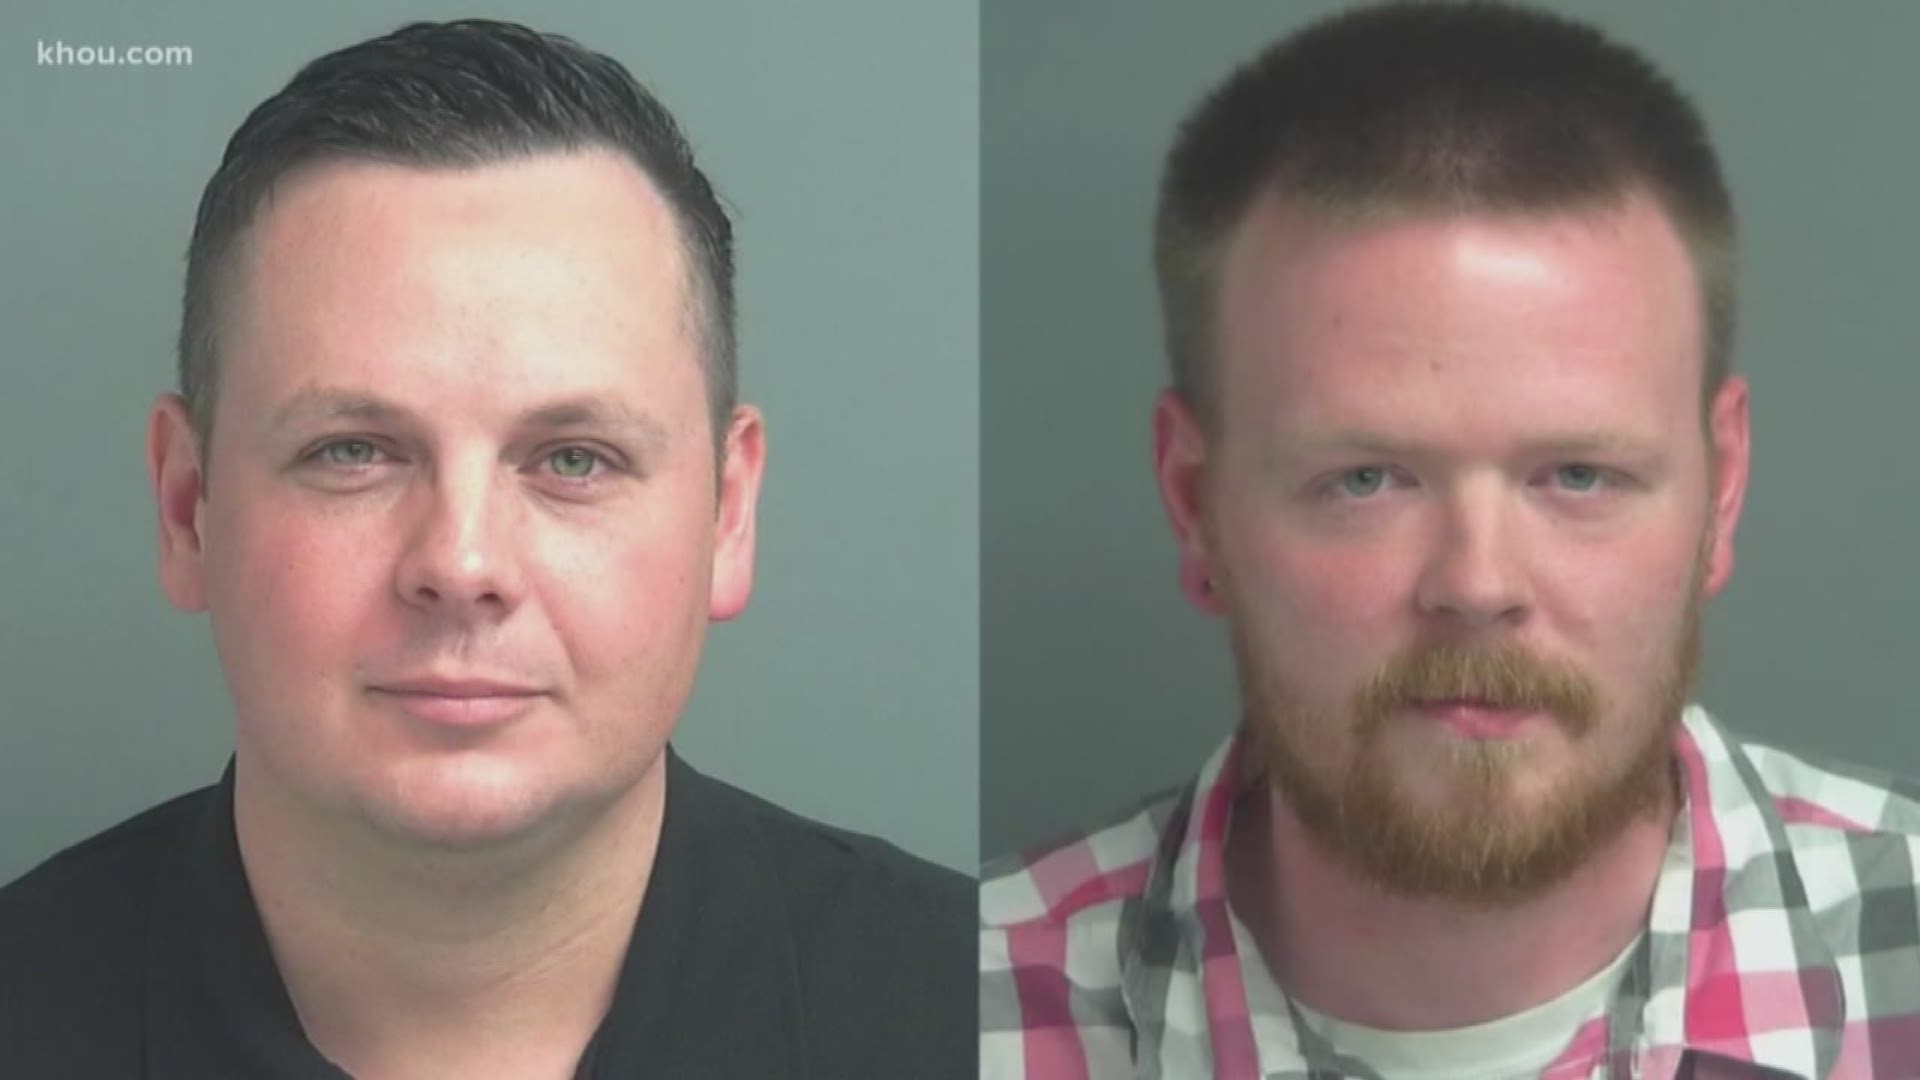 Two former Willis police officers were sentenced to a year in jail after lying about an arrest captured on bodycam video. Kenneth Elmore and John McCaffery were each convicted of felony tampering with a government record. The charges stemmed from a July 2017 arrest that began with a family dispute.